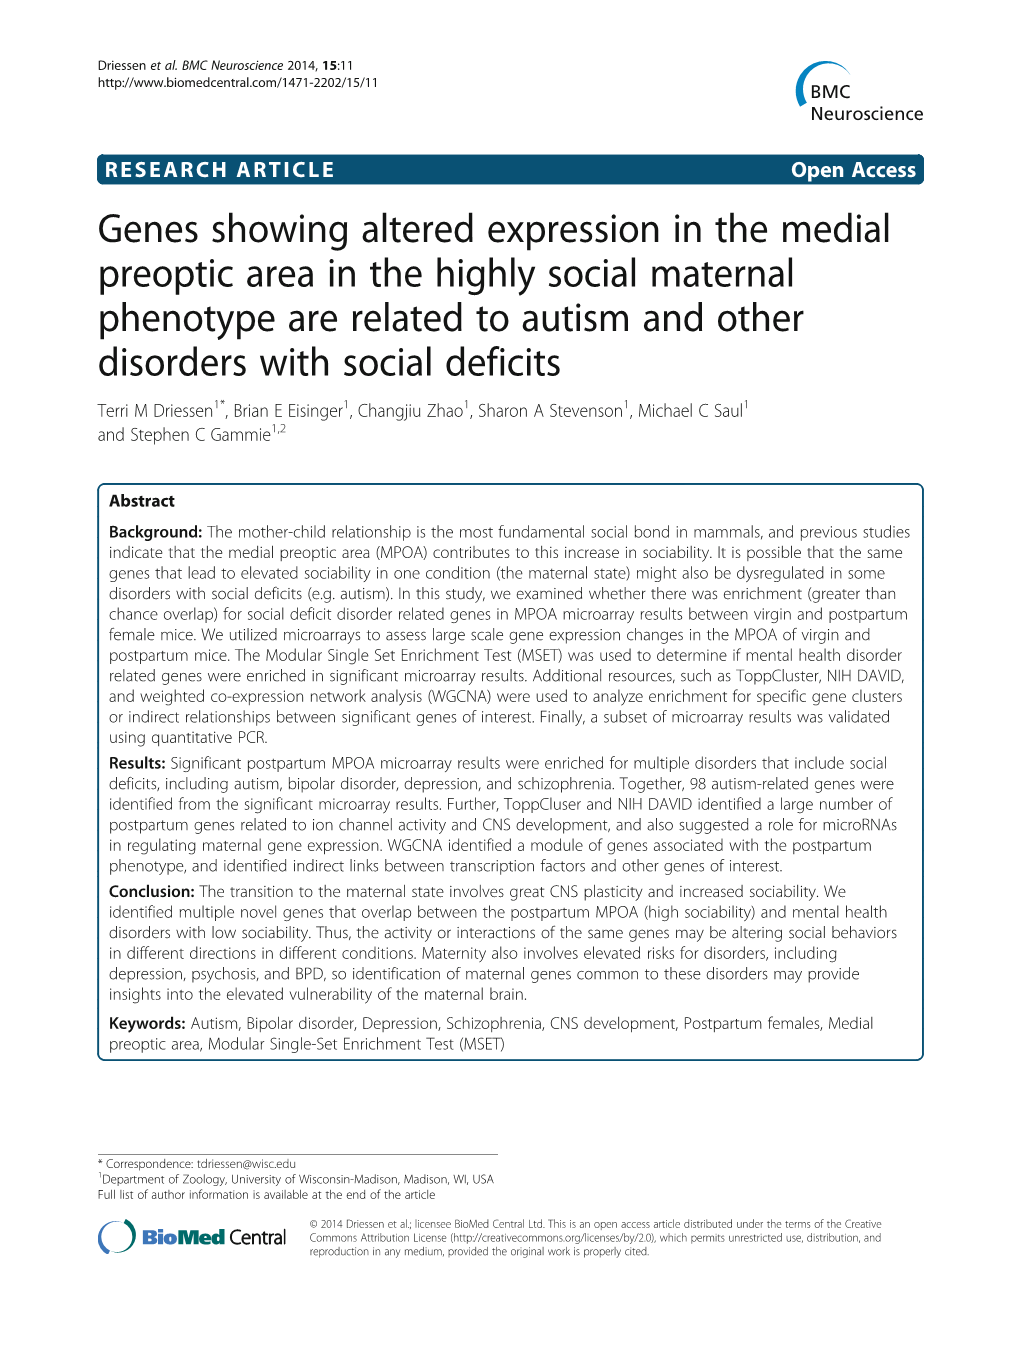 Genes Showing Altered Expression in the Medial Preoptic Area in The